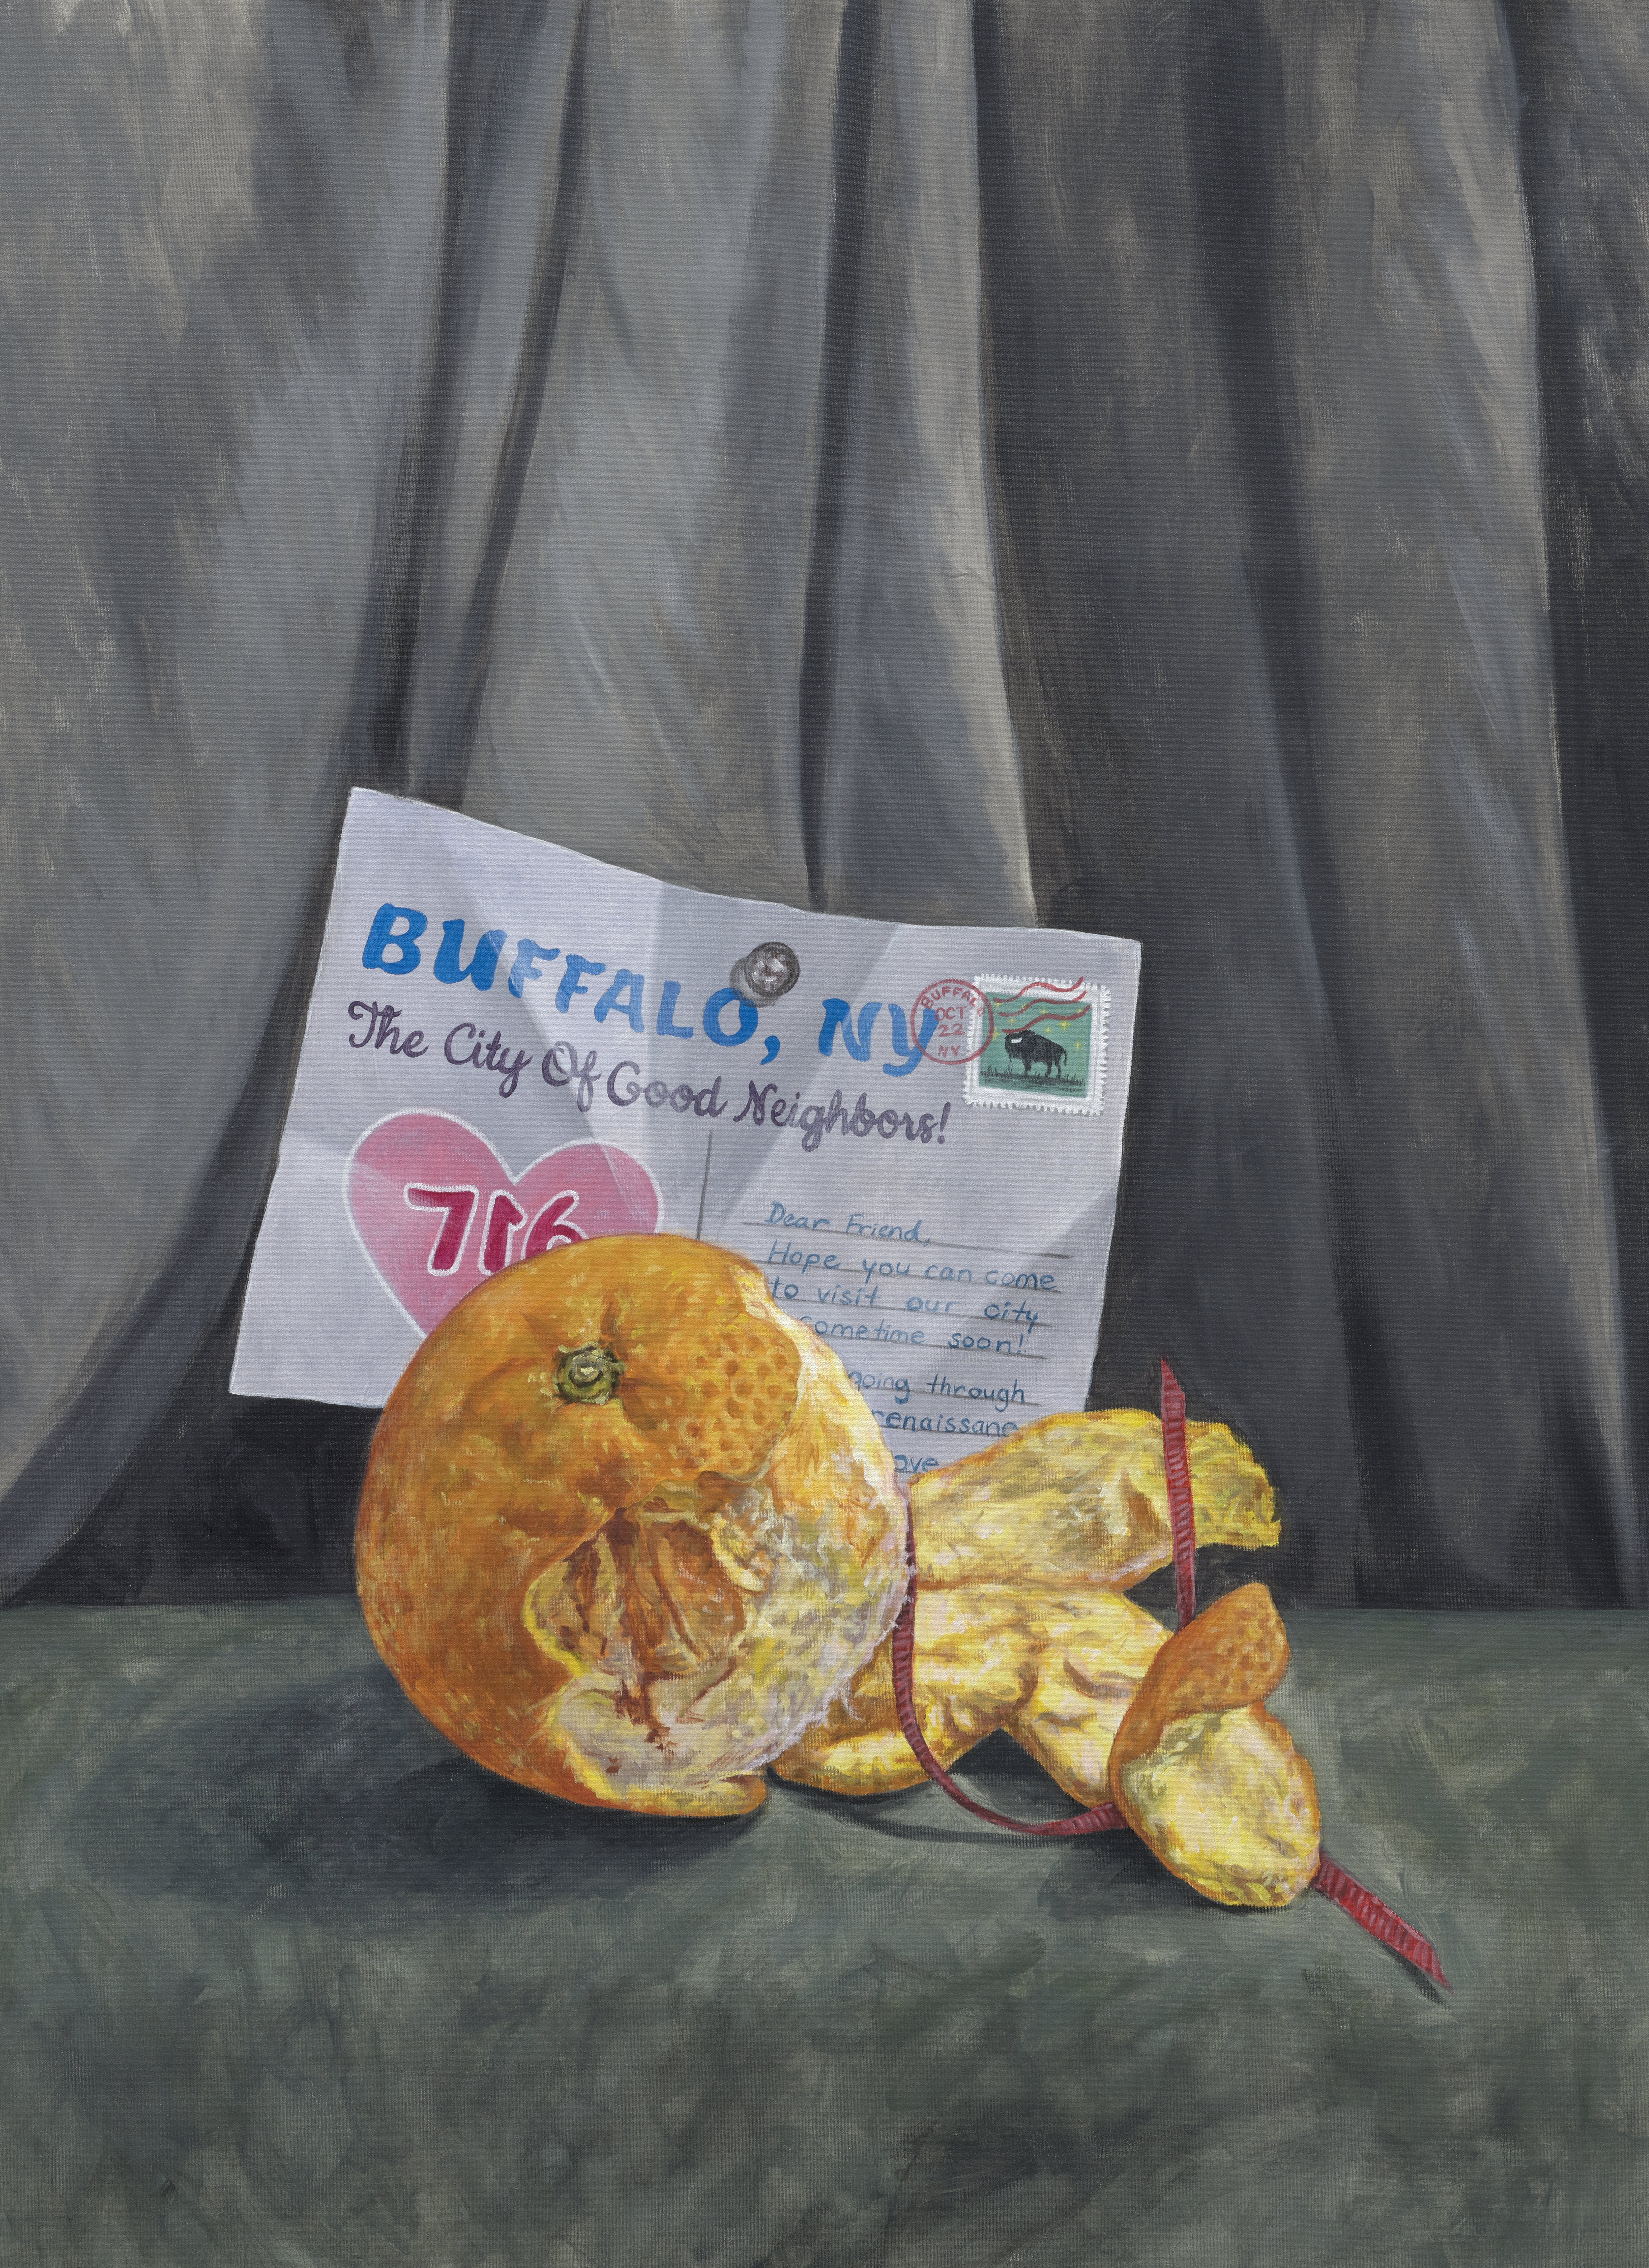 Oil painting of a peeled orange with a postcard in the background stating "Buffalo, NY The City of Good Neighbors" 